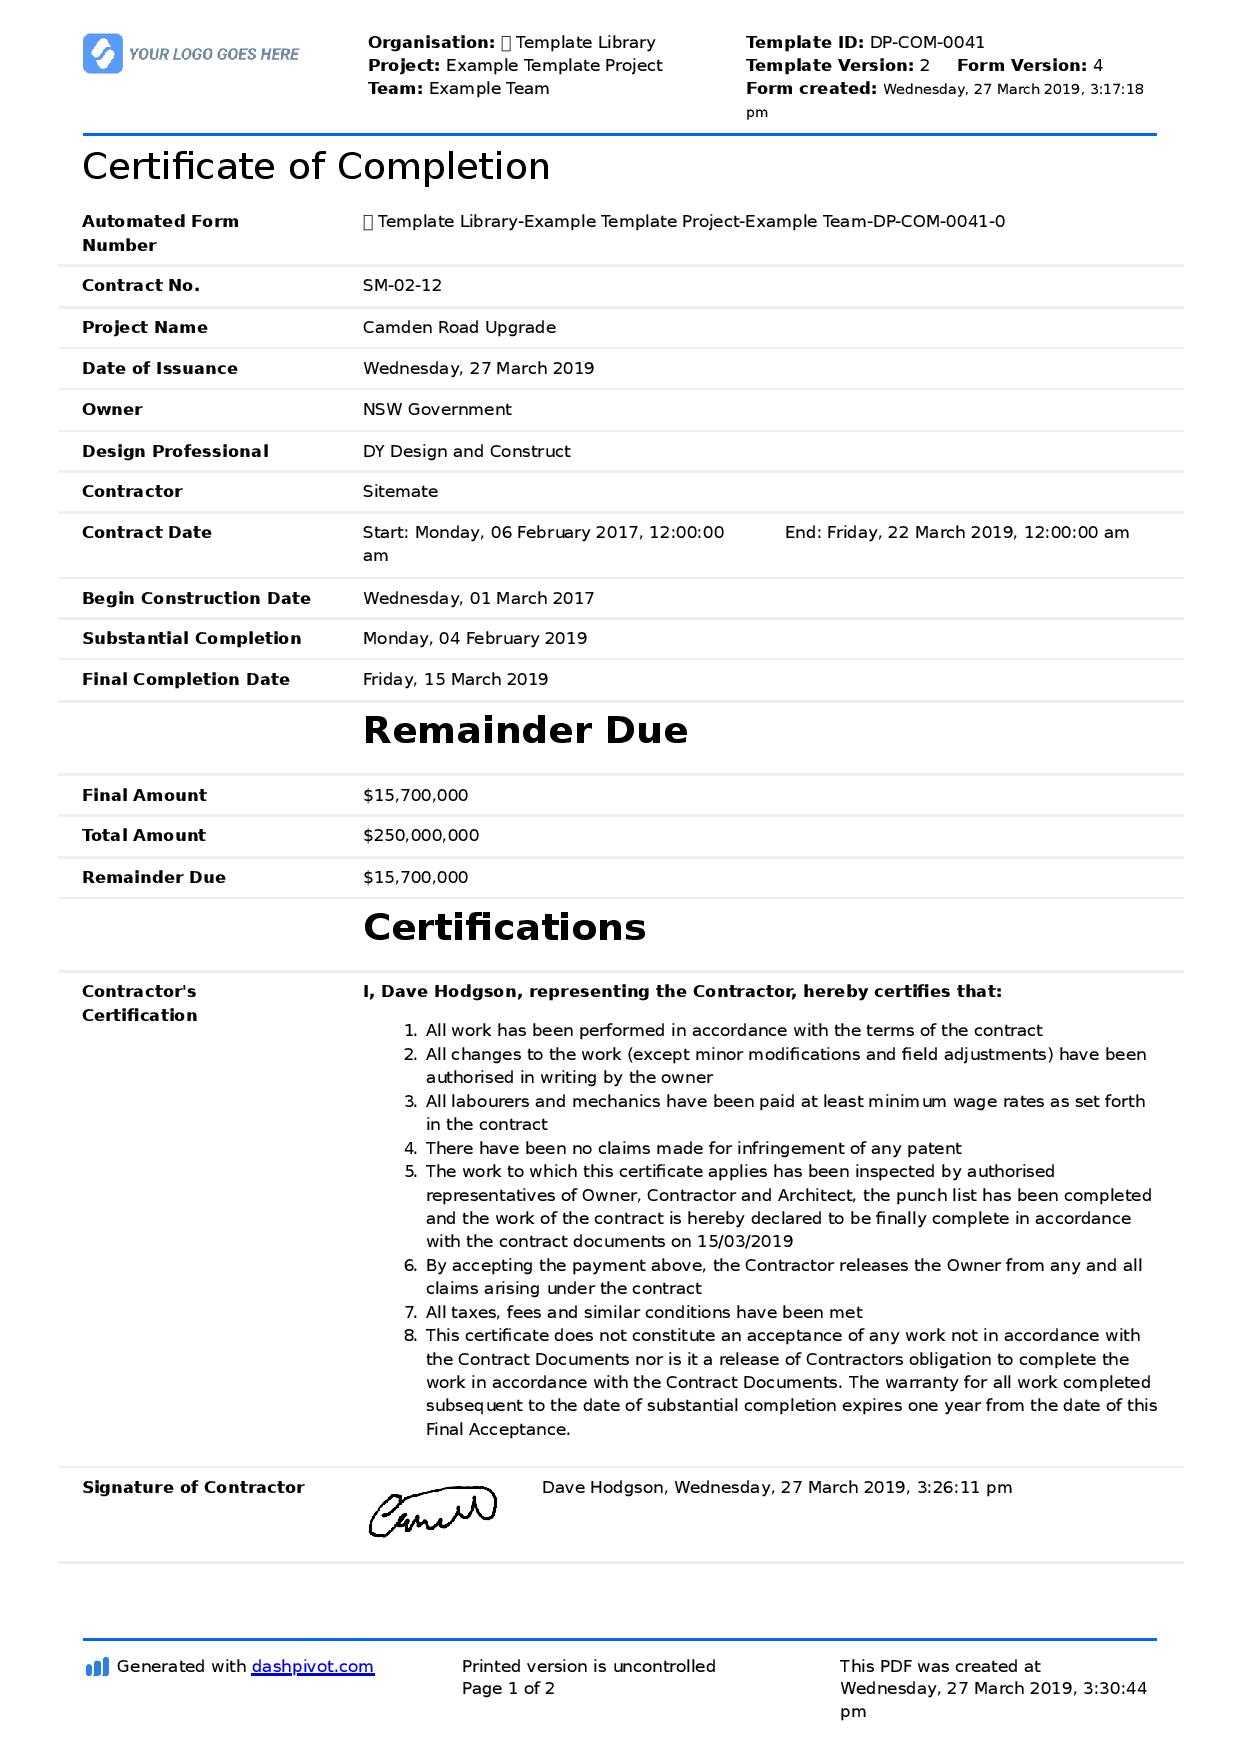 Certificate Of Completion For Construction (Free Template + With Certificate Of Acceptance Template